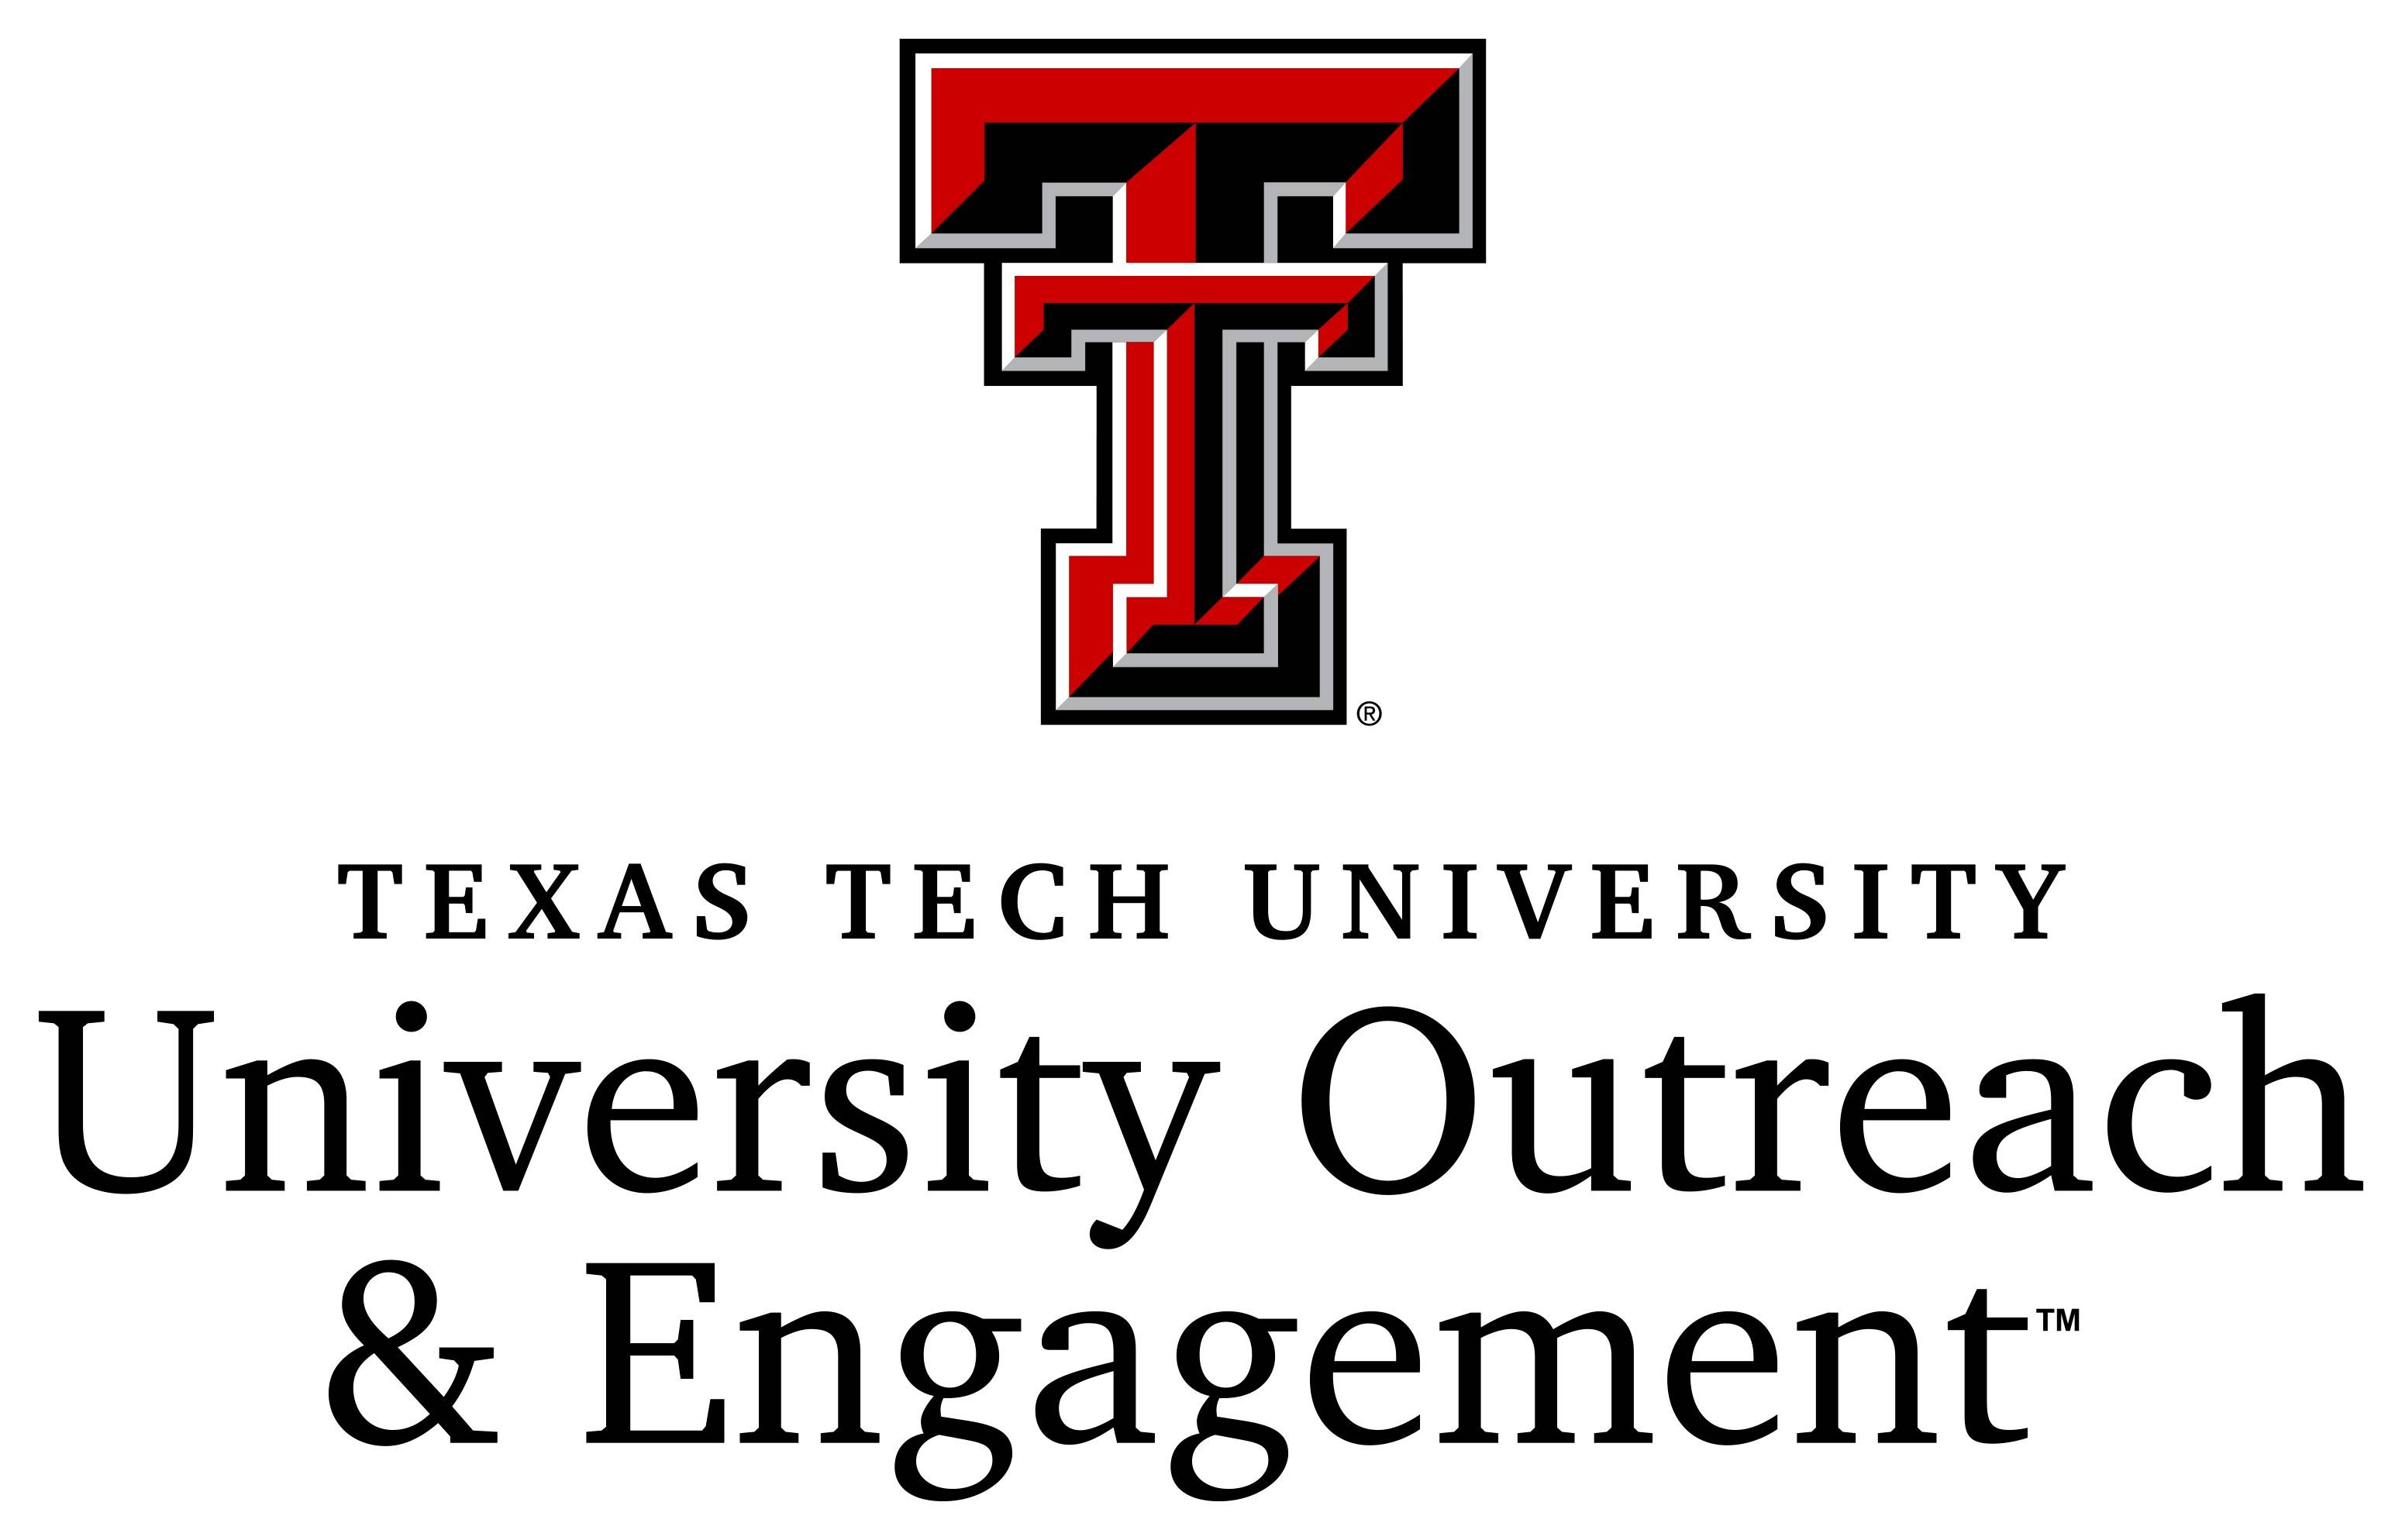 University Outreach and Engagement as established to provide innovative, collaborative, and strategic leadership and support for the university's strategic priority of engagement with communities across the region, state, nation, and the world.